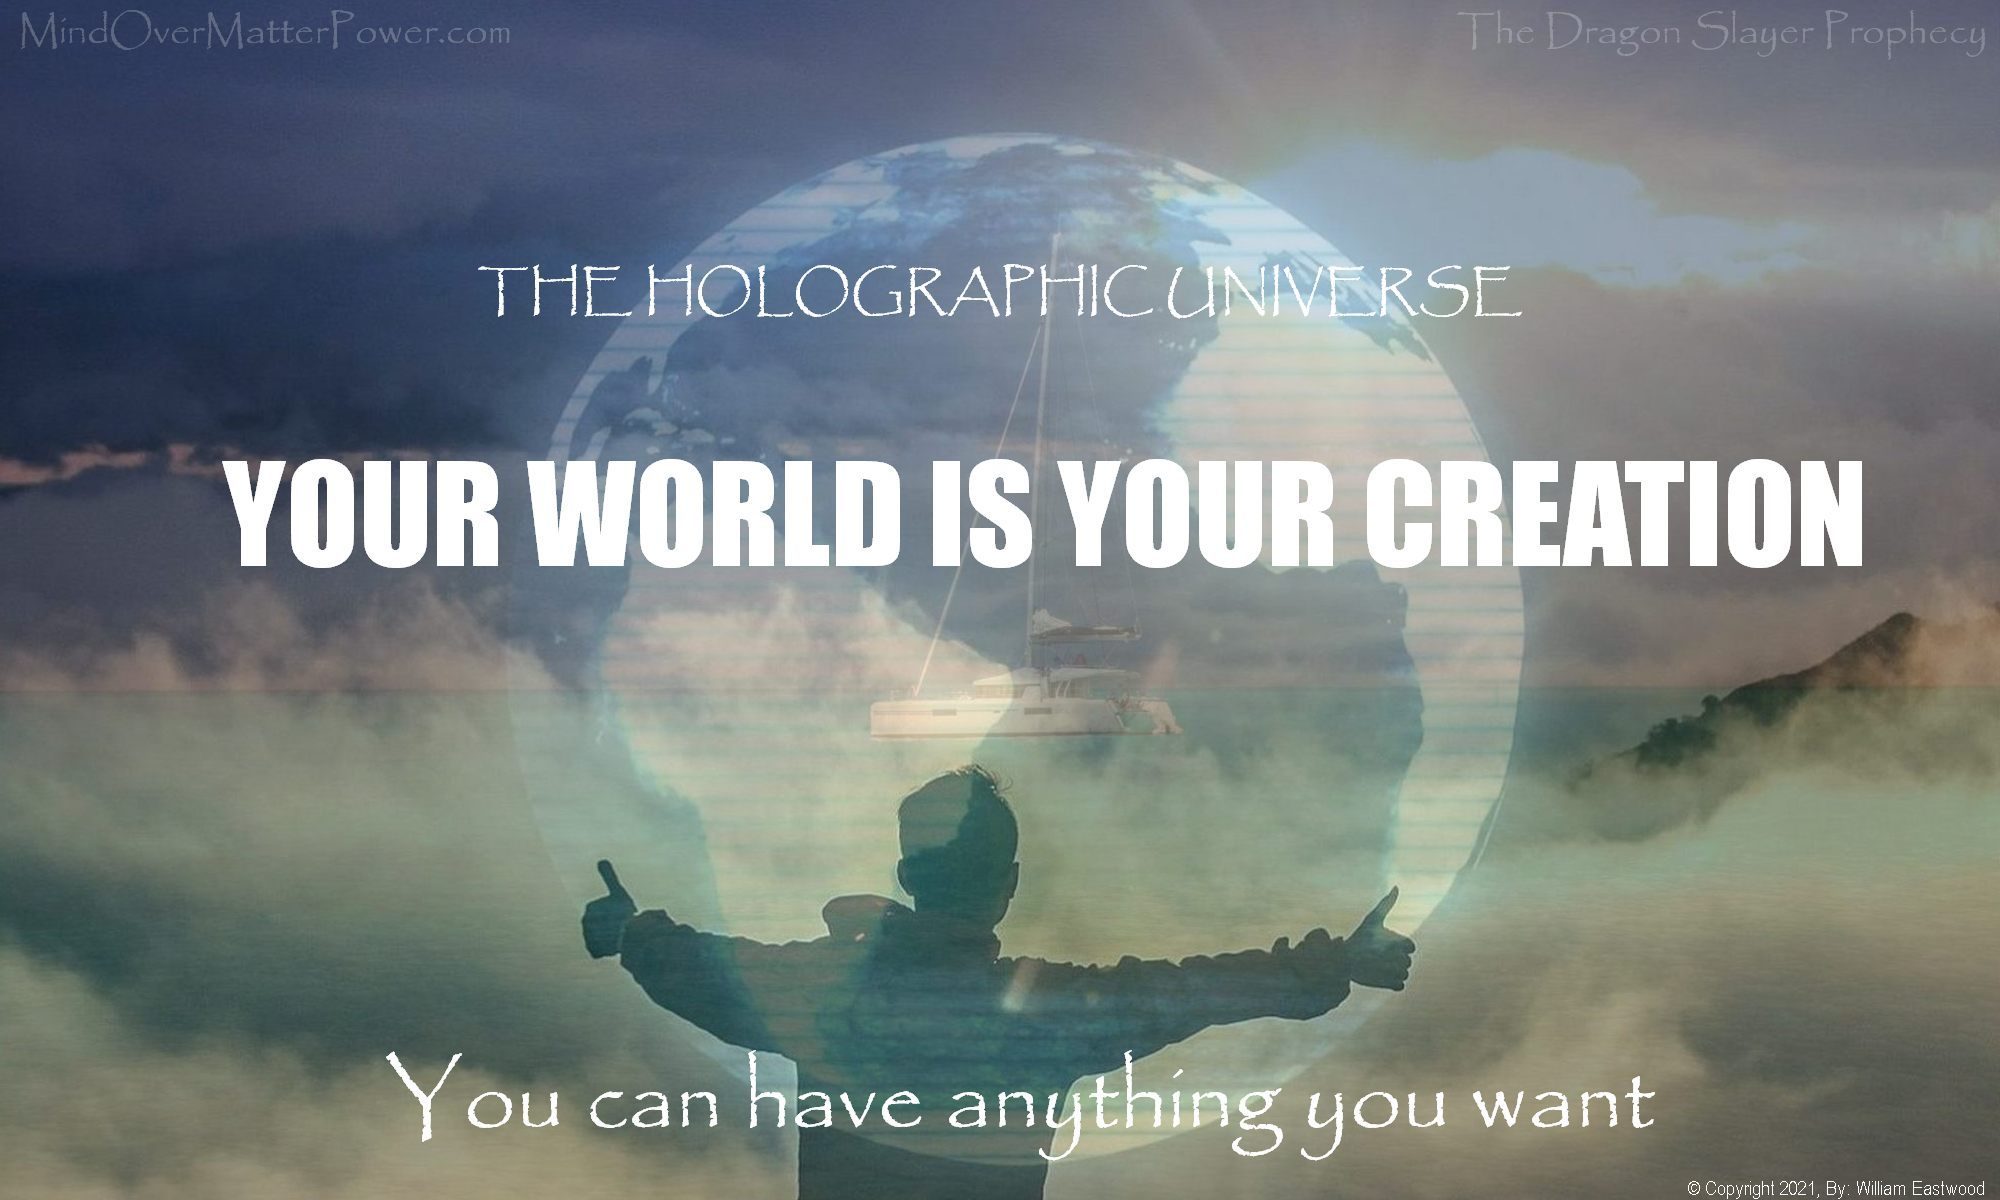 Your world is your creation means that you mind creates your reality and that you can have anything you want.